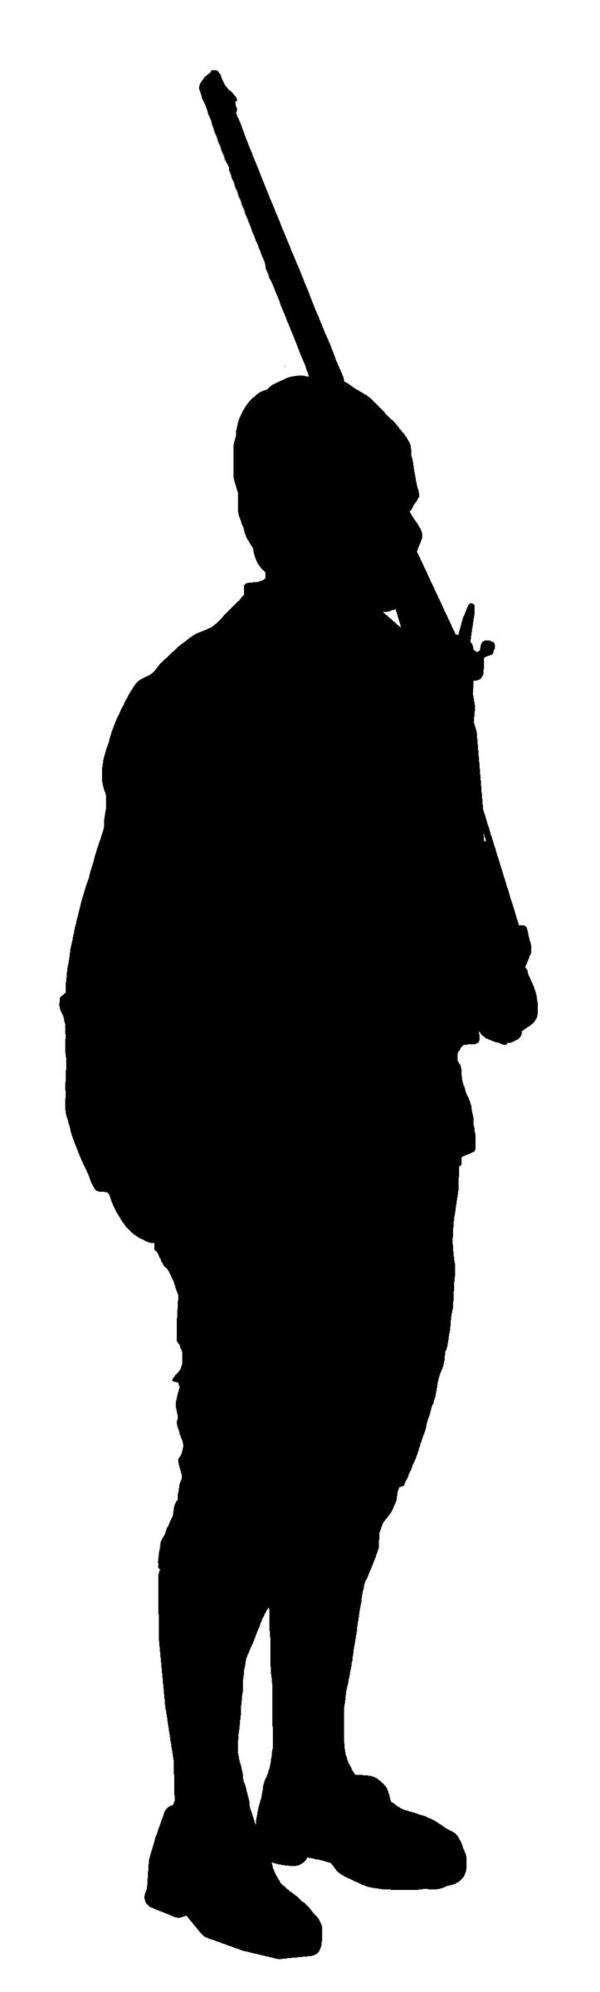 Silhouette of a man in 18th century clothing with a musket leaned against his left shoulder.